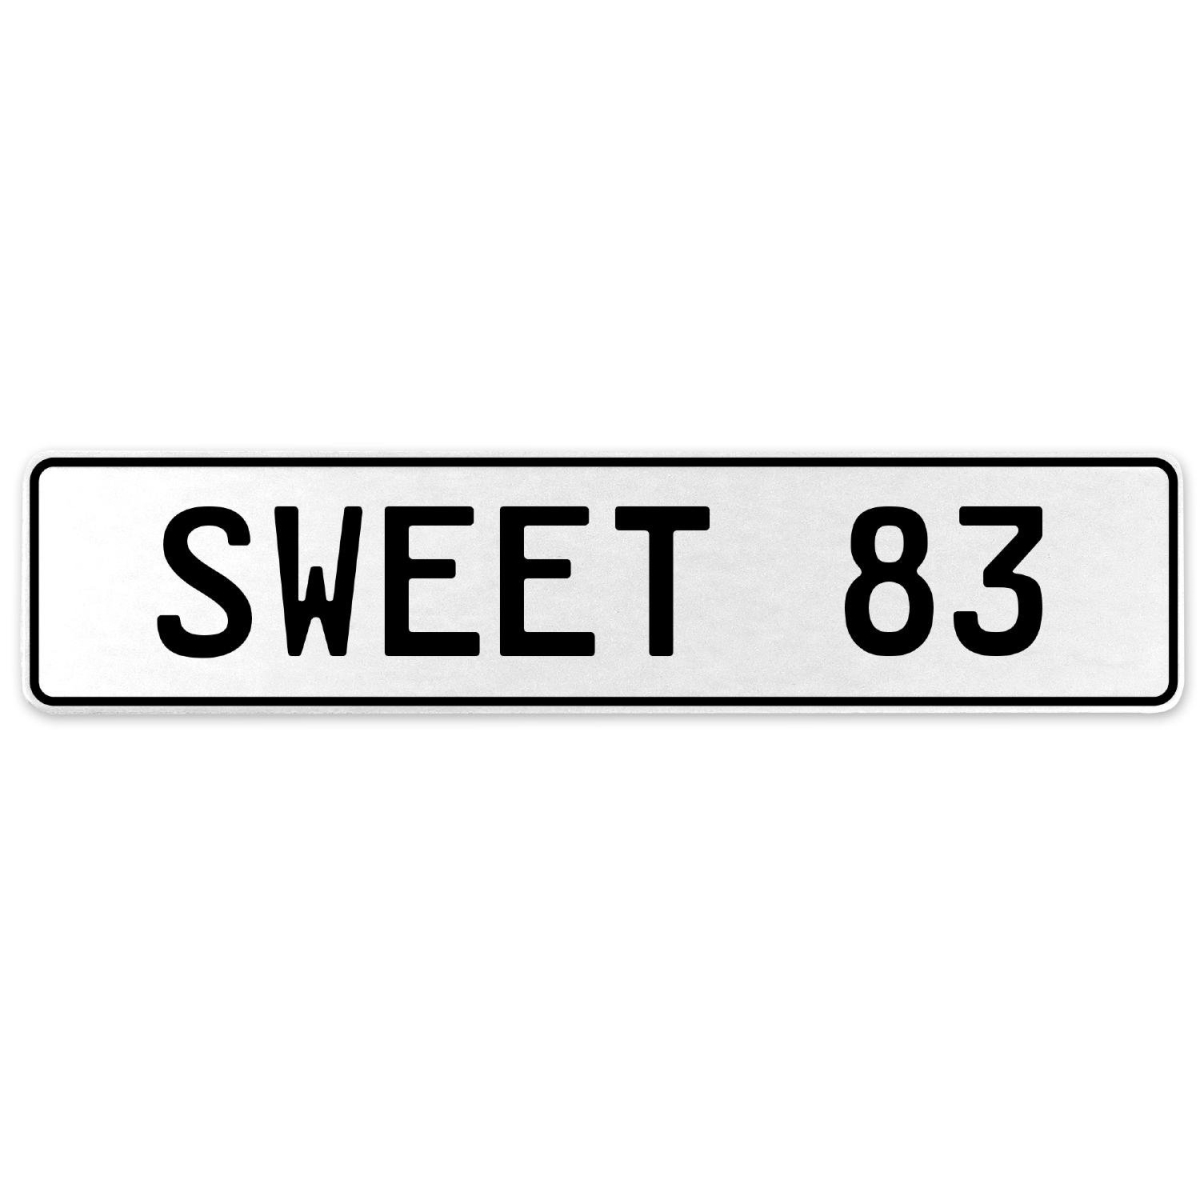 554185 Sweet 83 - White Aluminum Street Sign Mancave Euro Plate Name Door Sign Wall